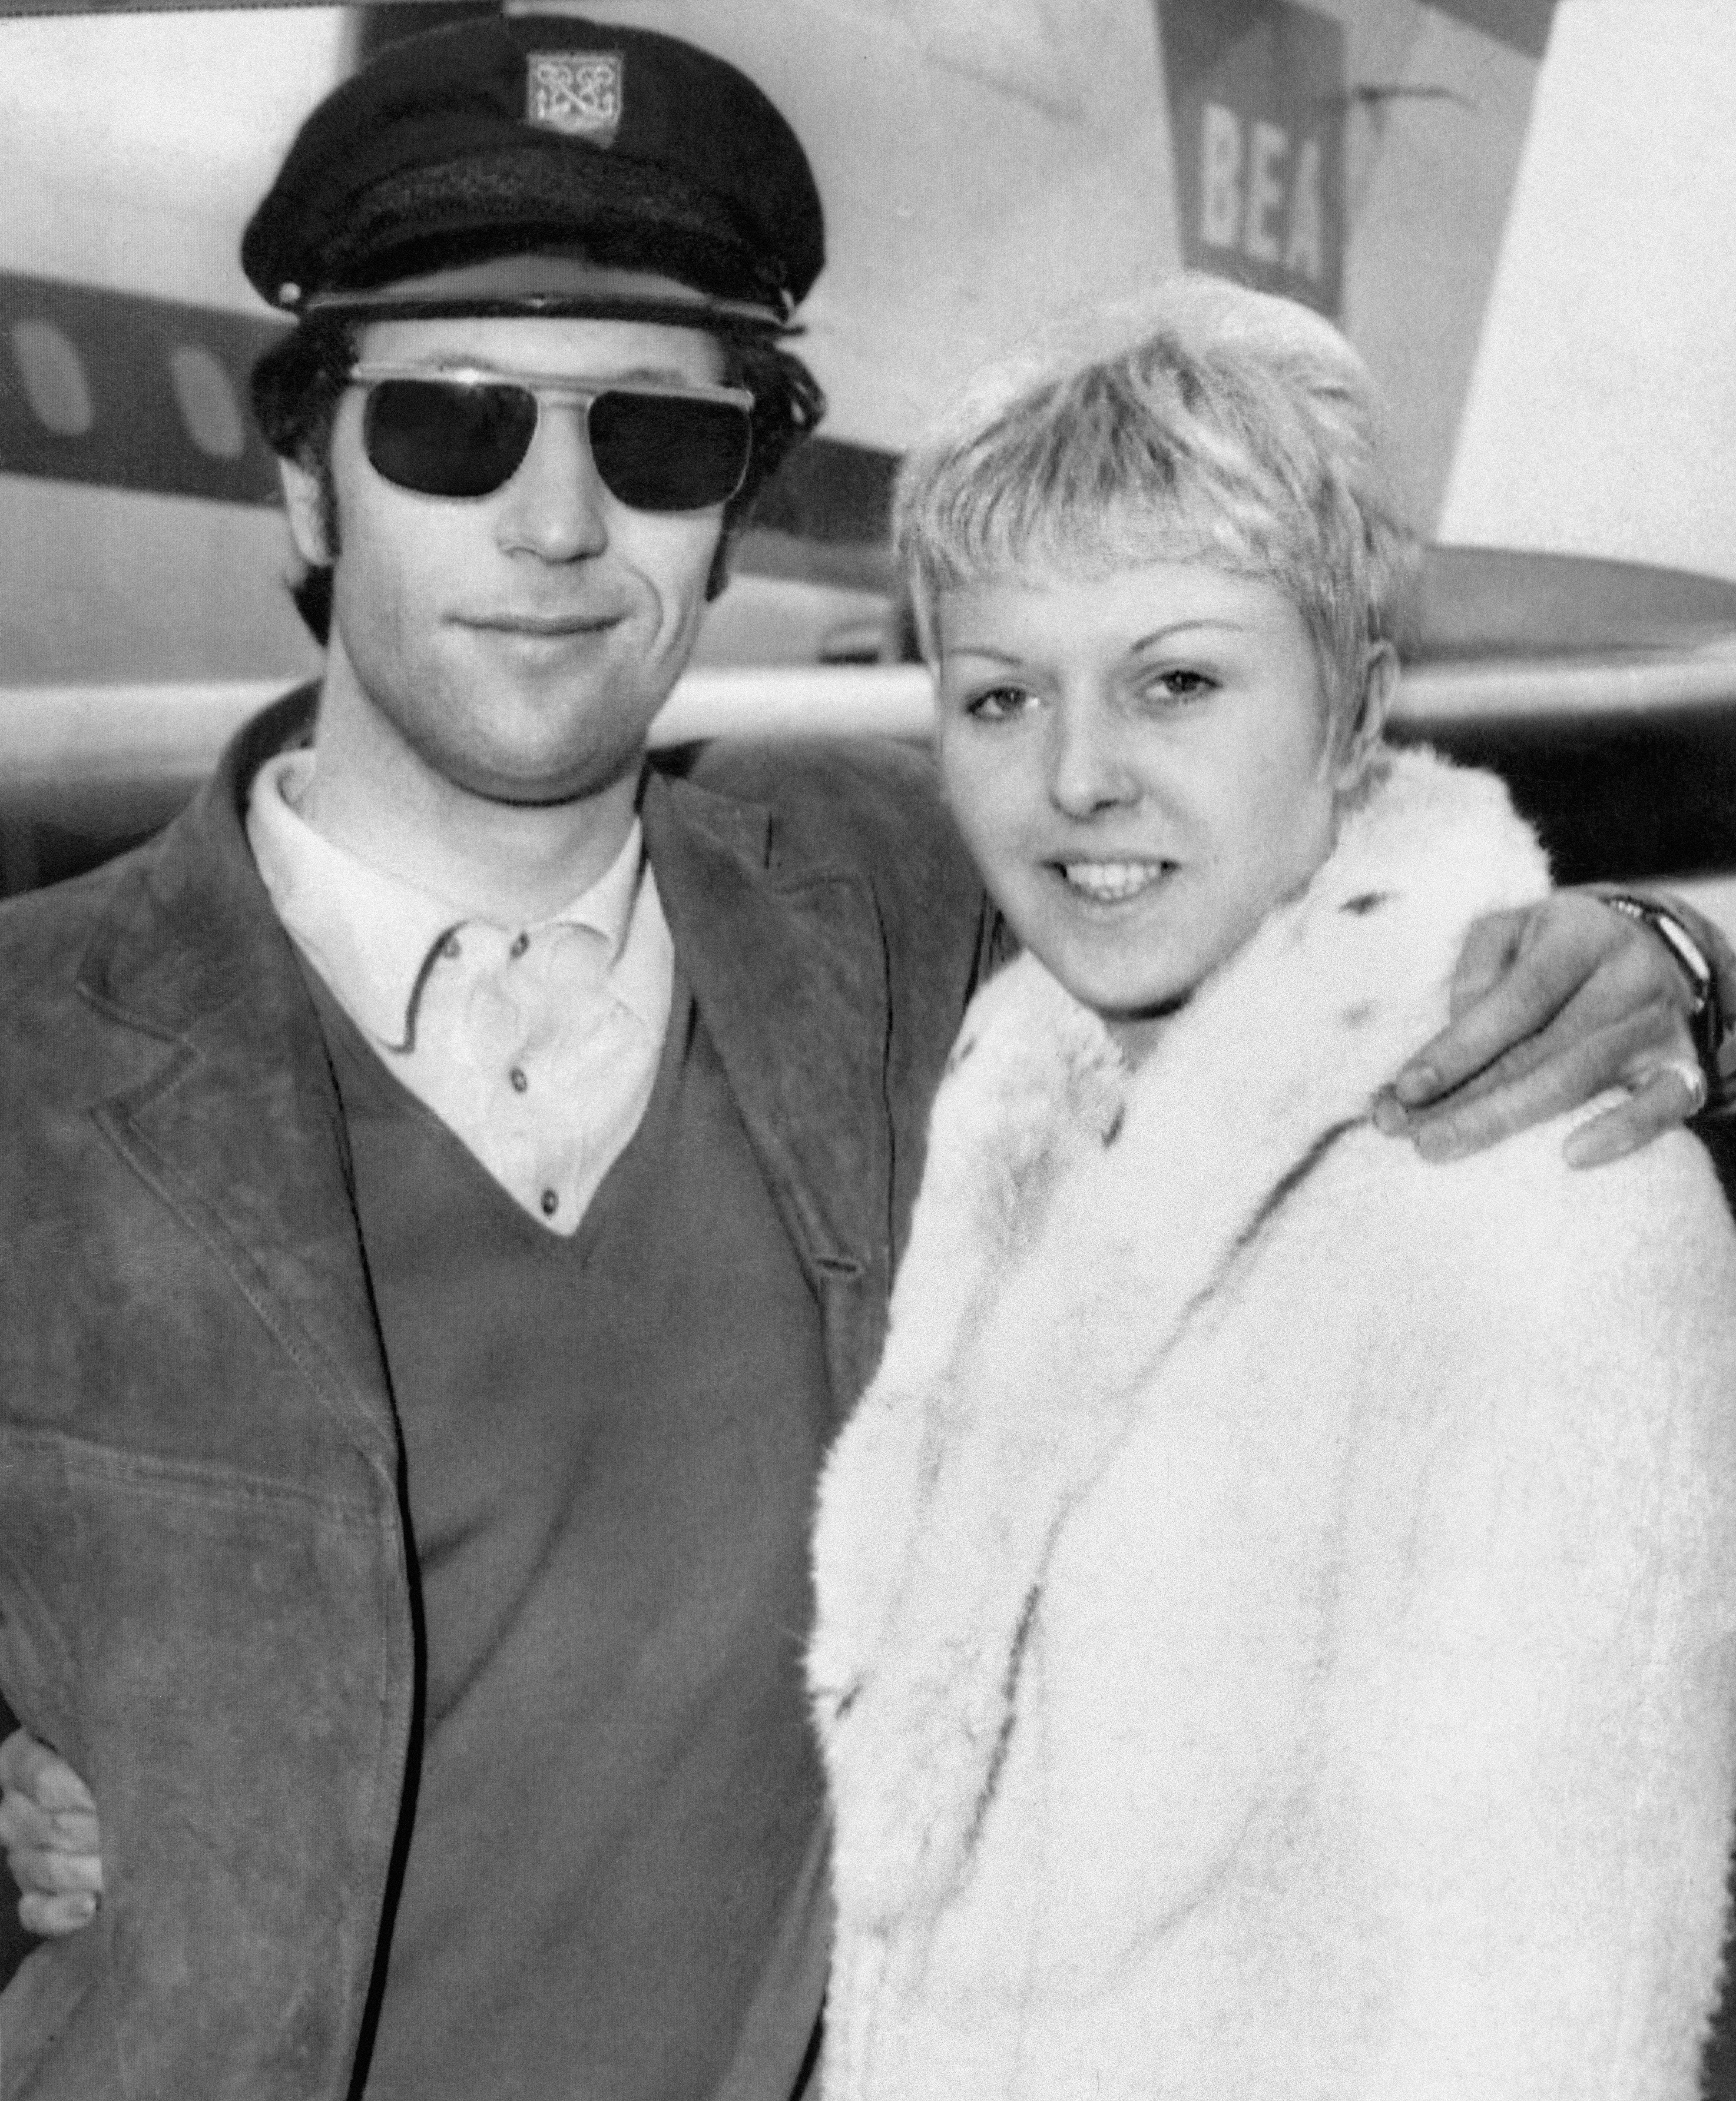 Tom Jones and Linda Trenchard after arriving from France on April 8, 1965 | Source: Getty Images